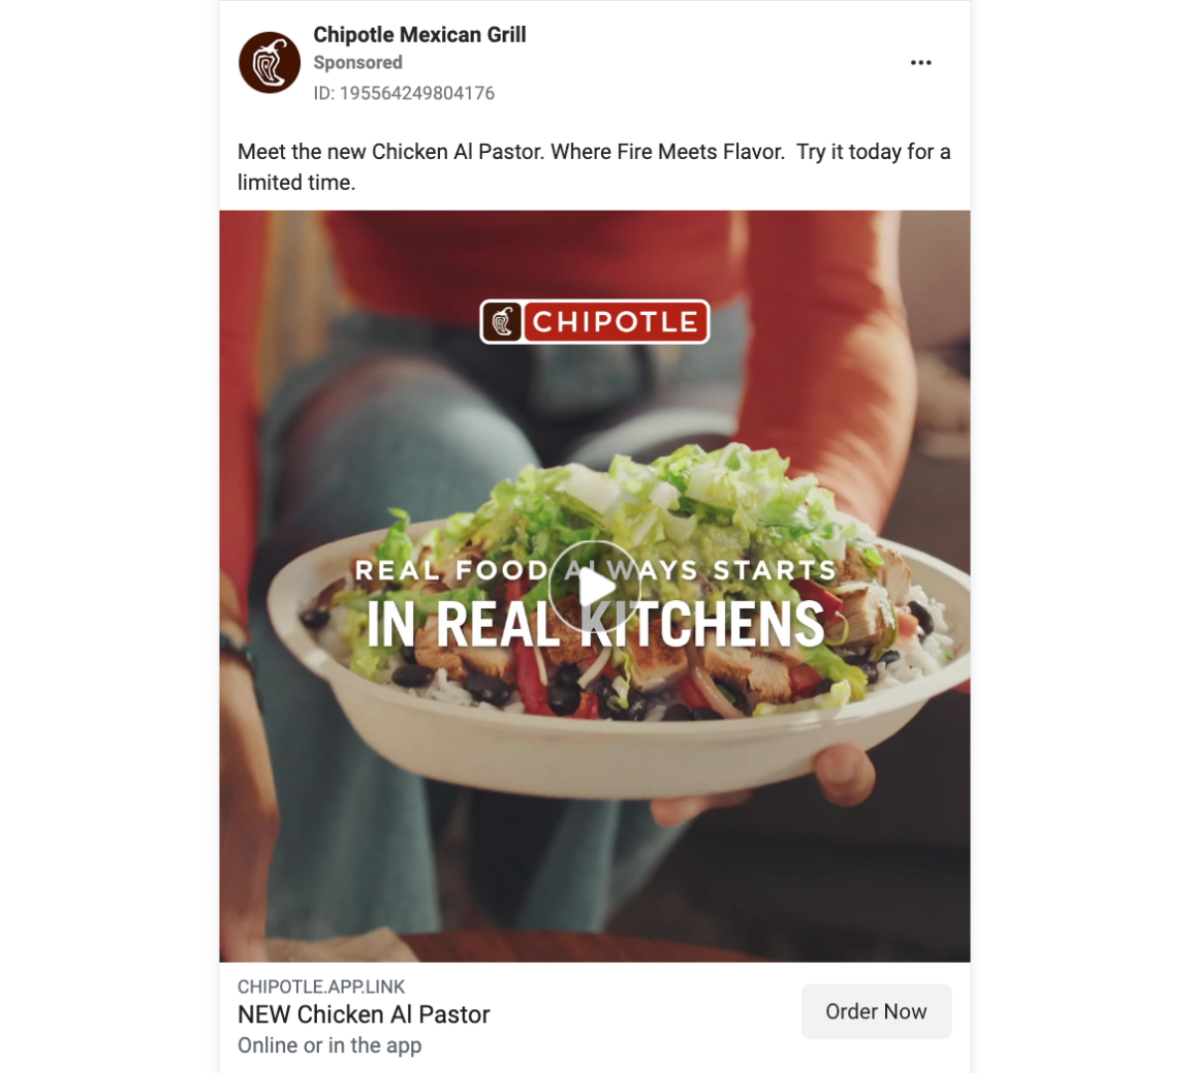 Example restaurant Instagram ad from Chipotle